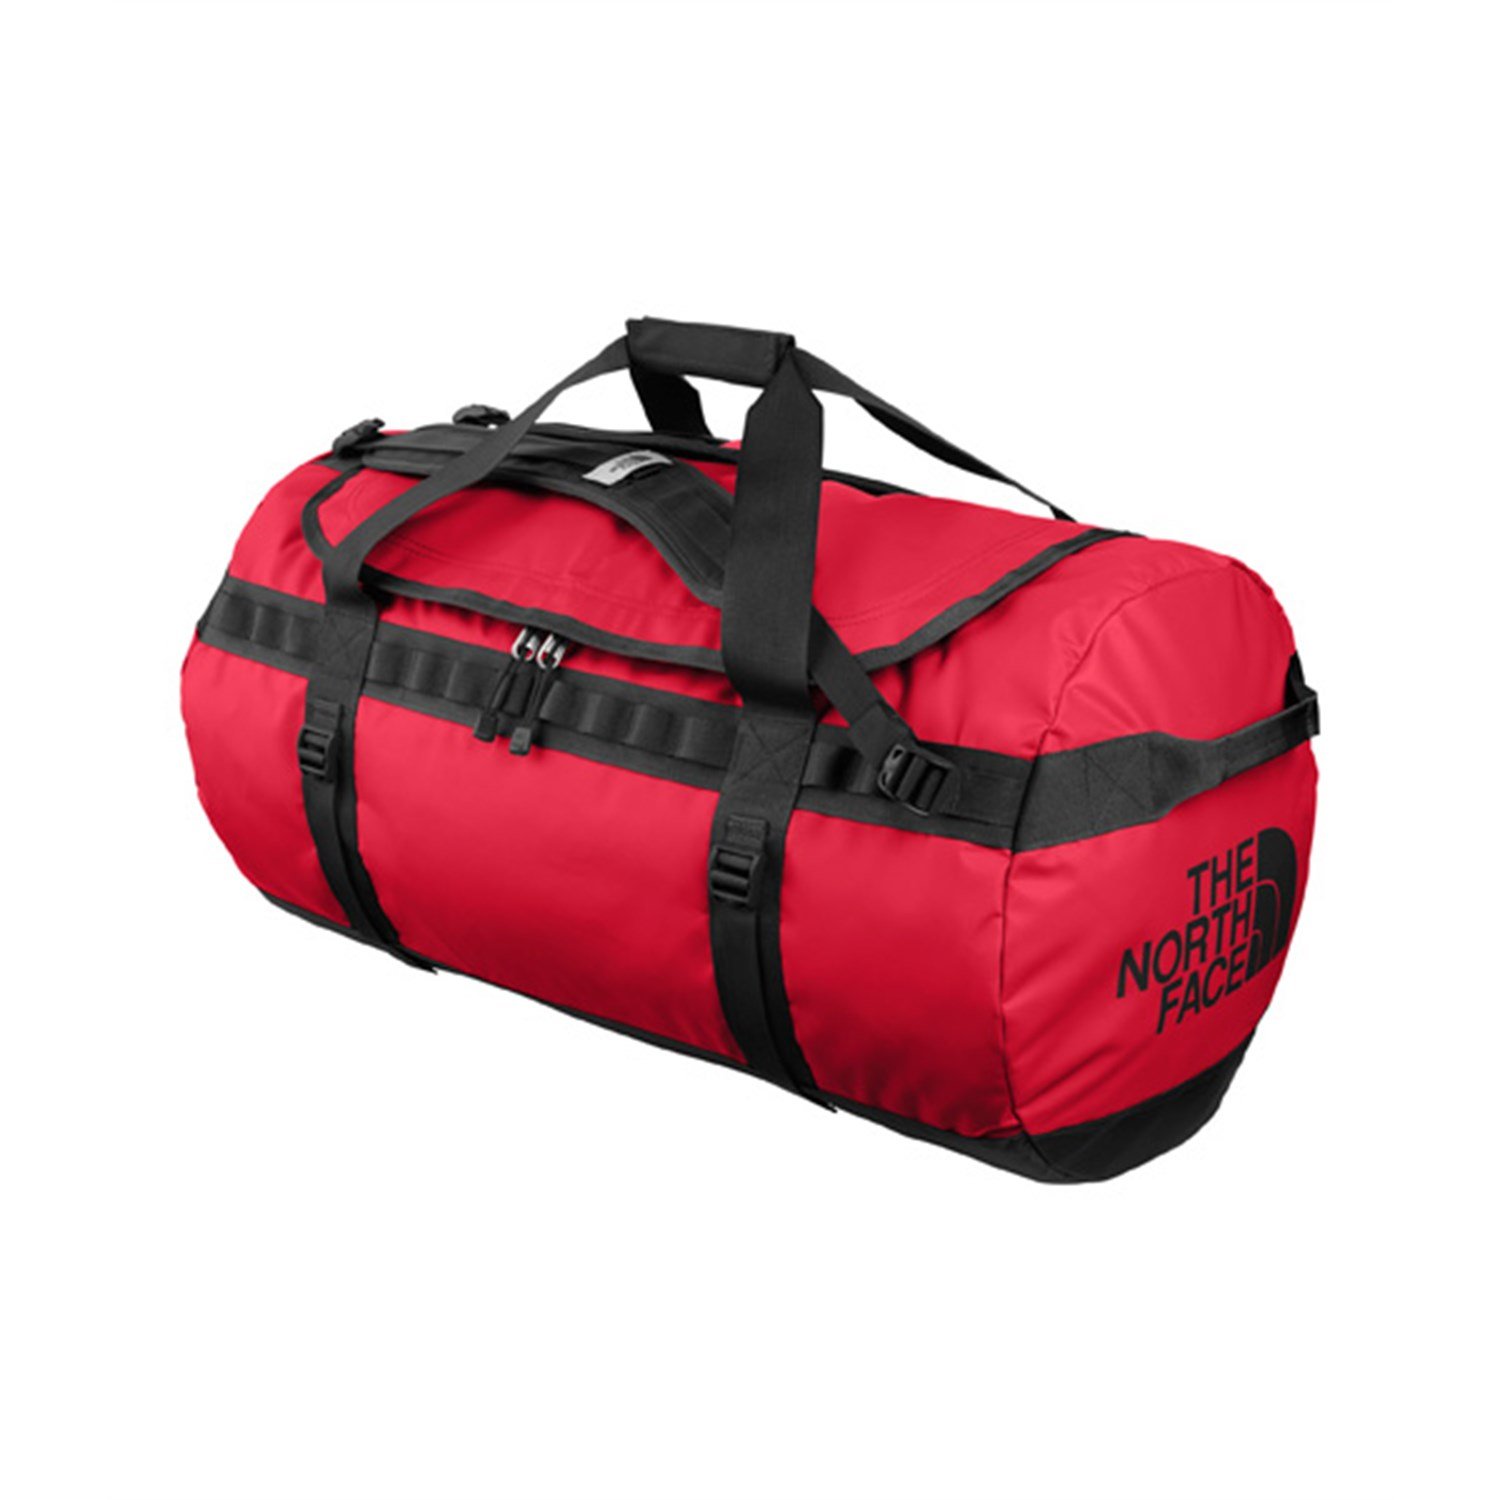 The North Face Base Camp Duffel Bag - Large | evo